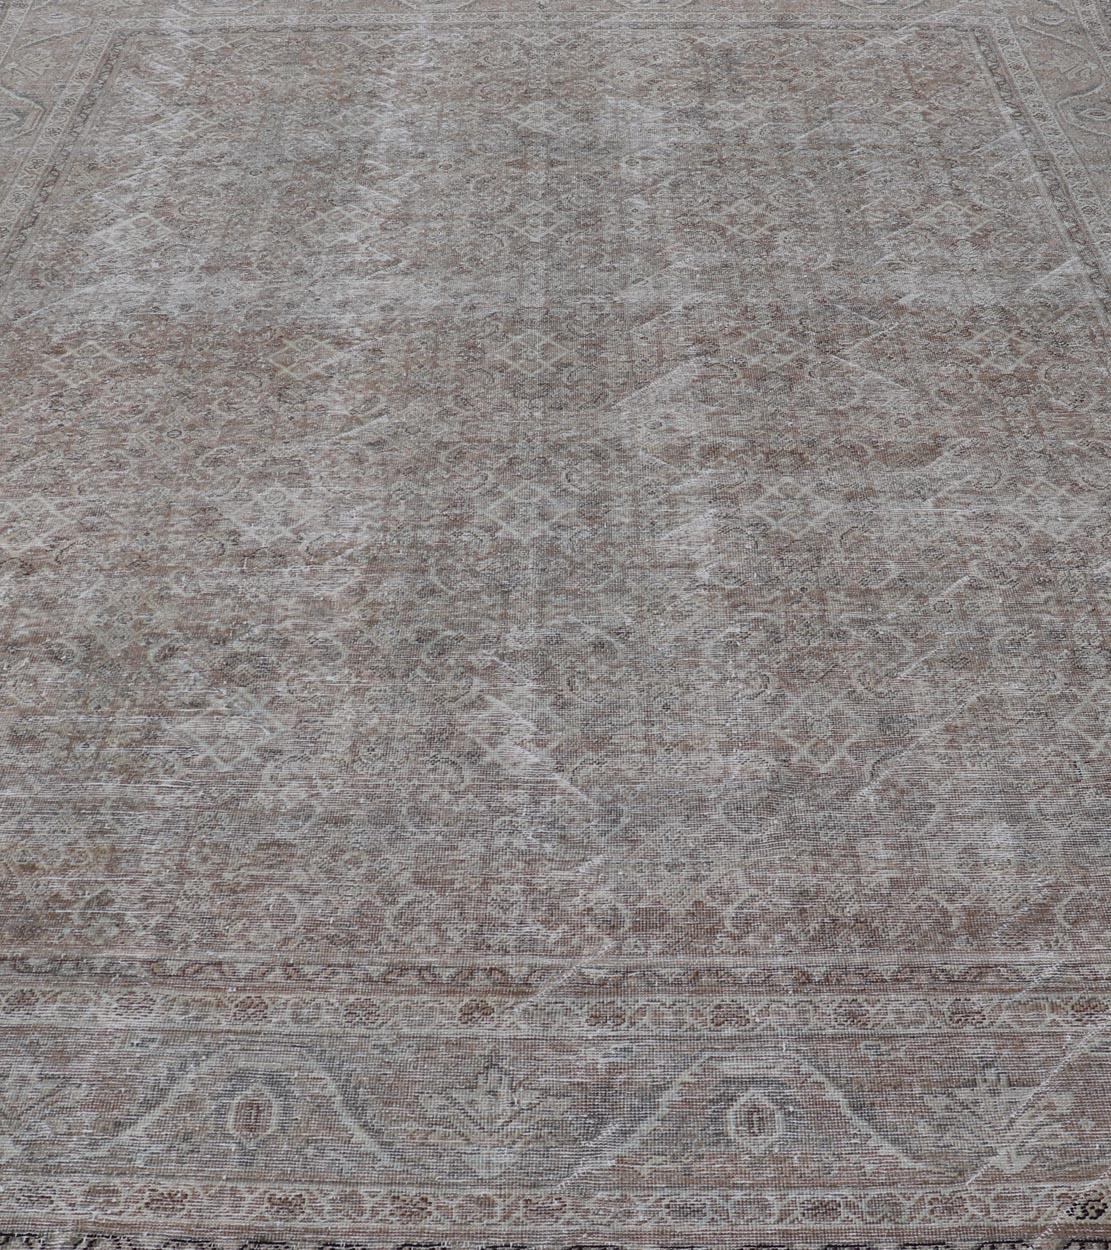 Wool Antique Persian Distressed Mahal Rug in Warm Earthy Tones with All-Over Design